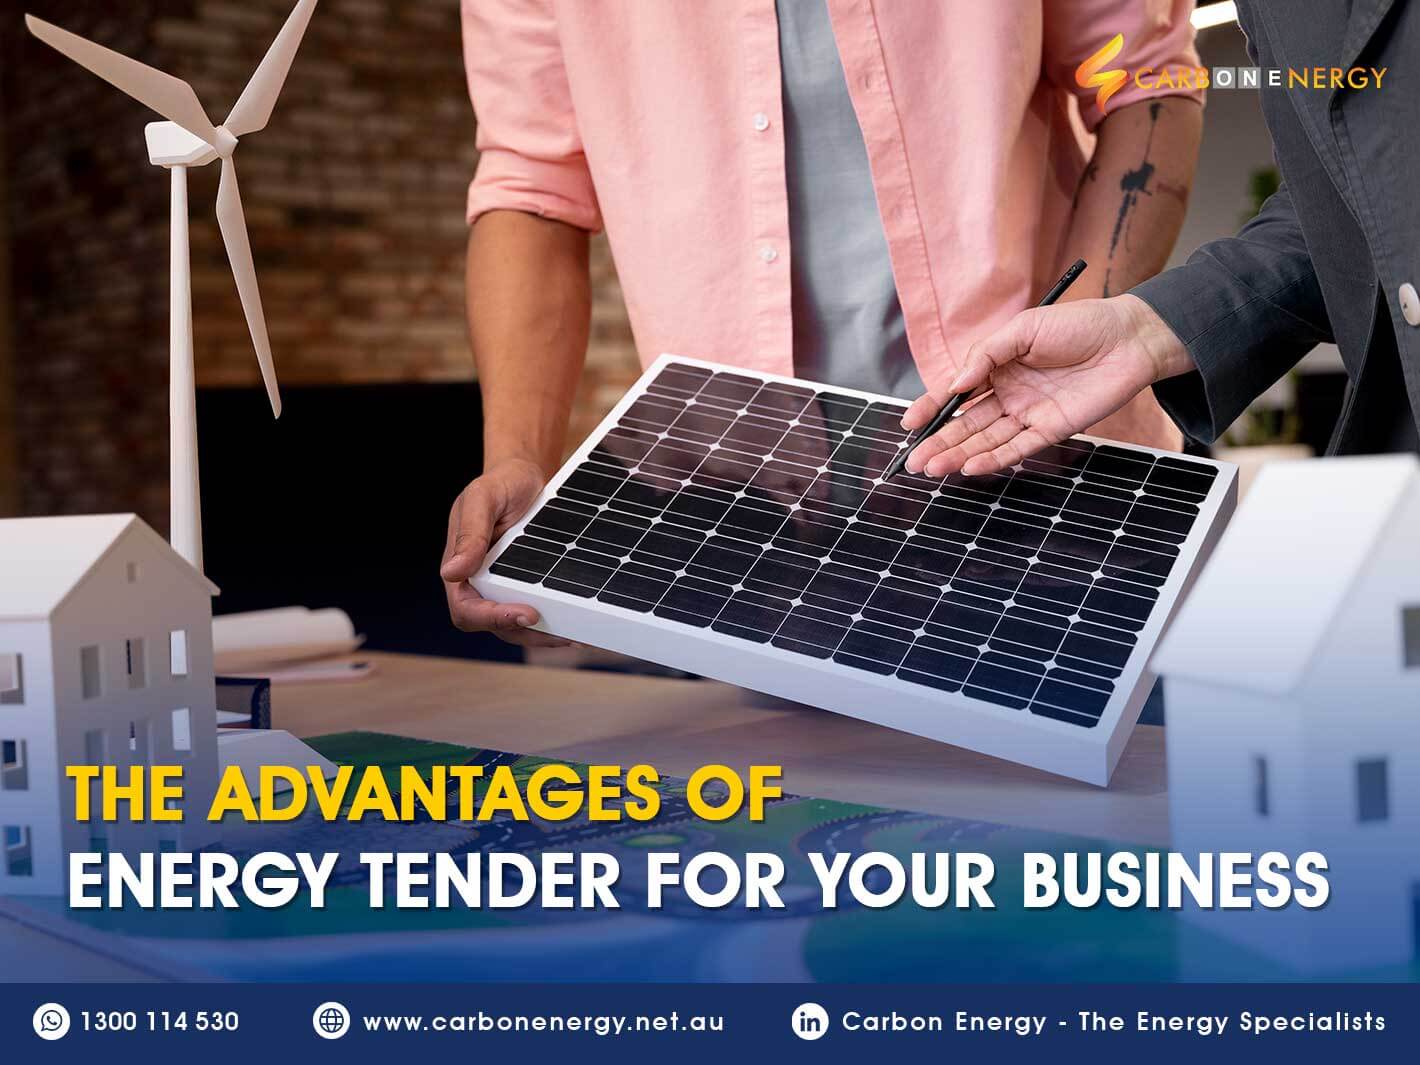 The Advantages of Energy Tender for Your Business